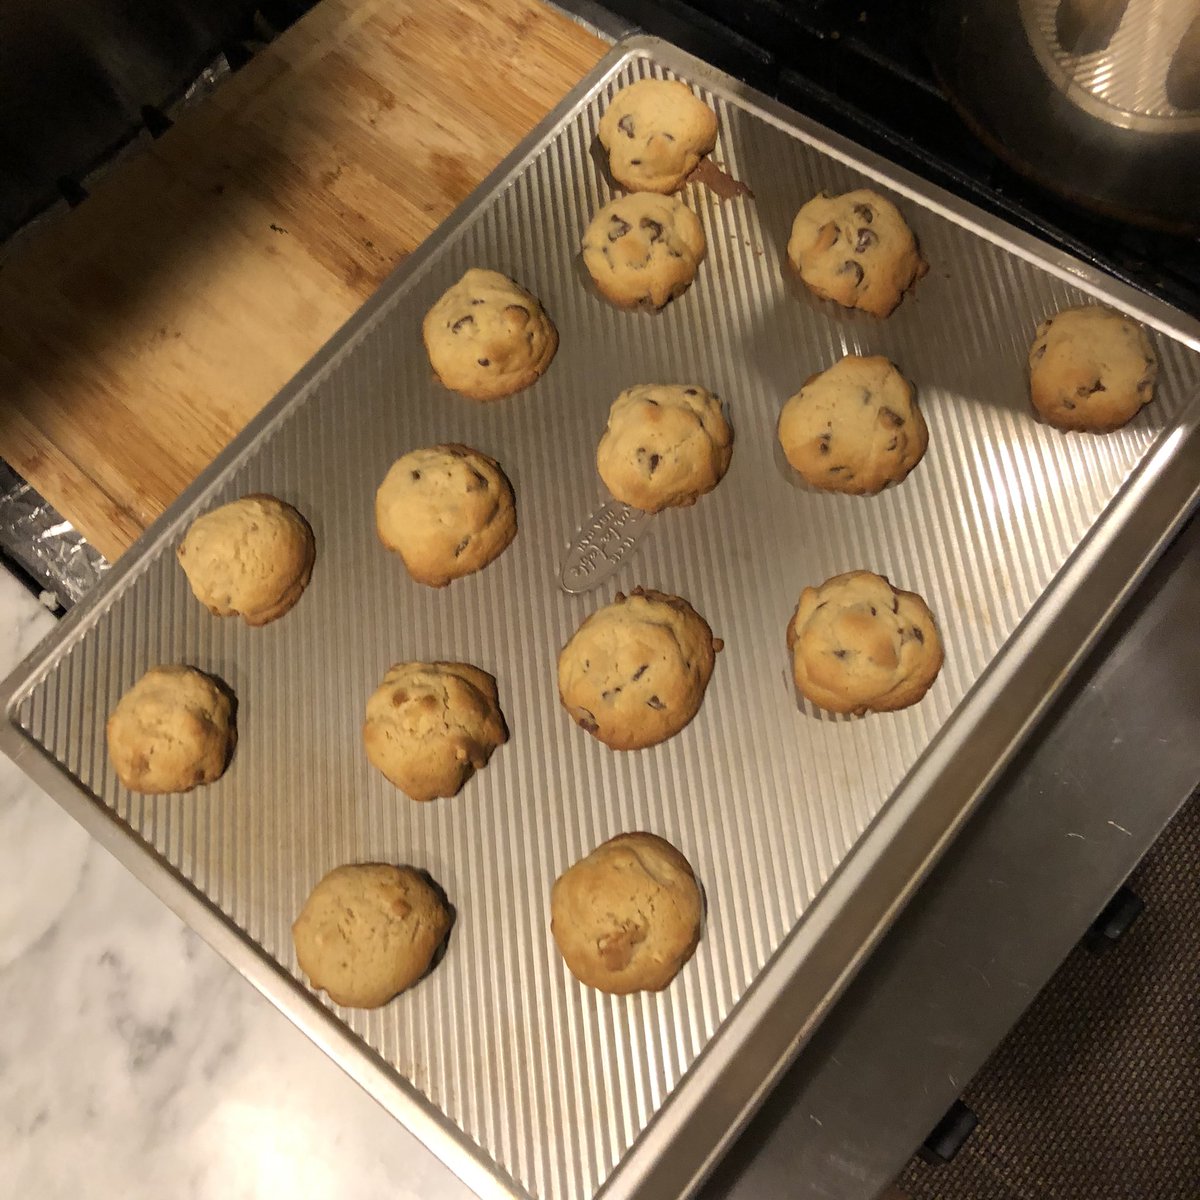 Did I mention another family member is baking chocolate chip cookies? It is 1:30 am and I just stuffed my mouth with 2 of them. The entire home is steamy & buttery right now Fortifying myself for what’s to come